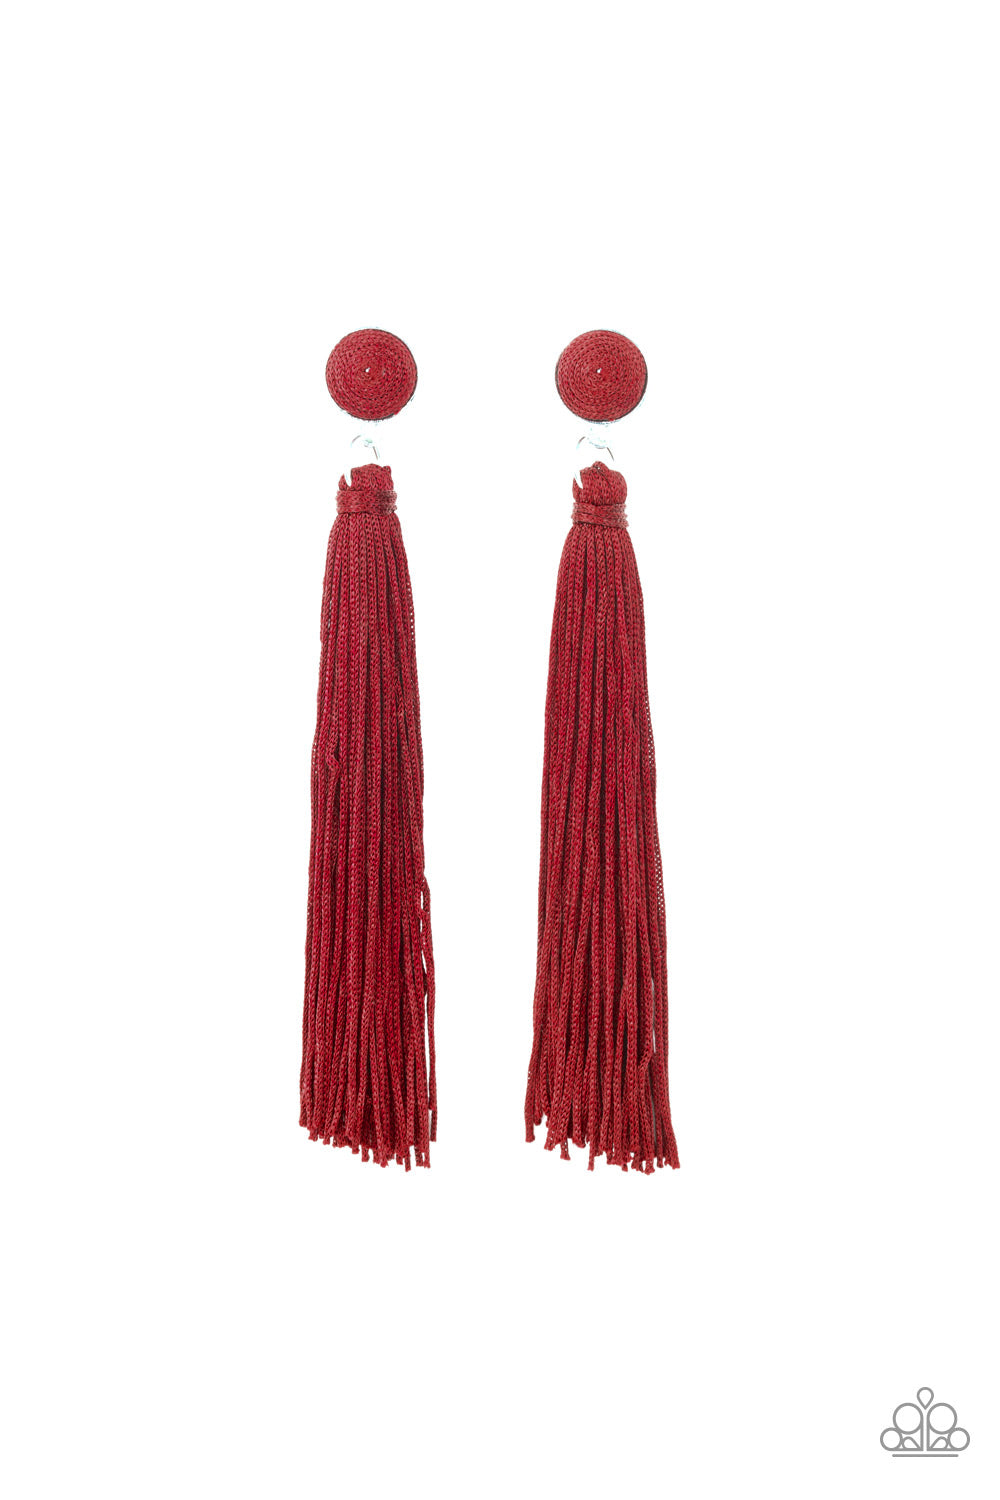 Tightrope Tassle red - VJ Bedazzled Jewelry